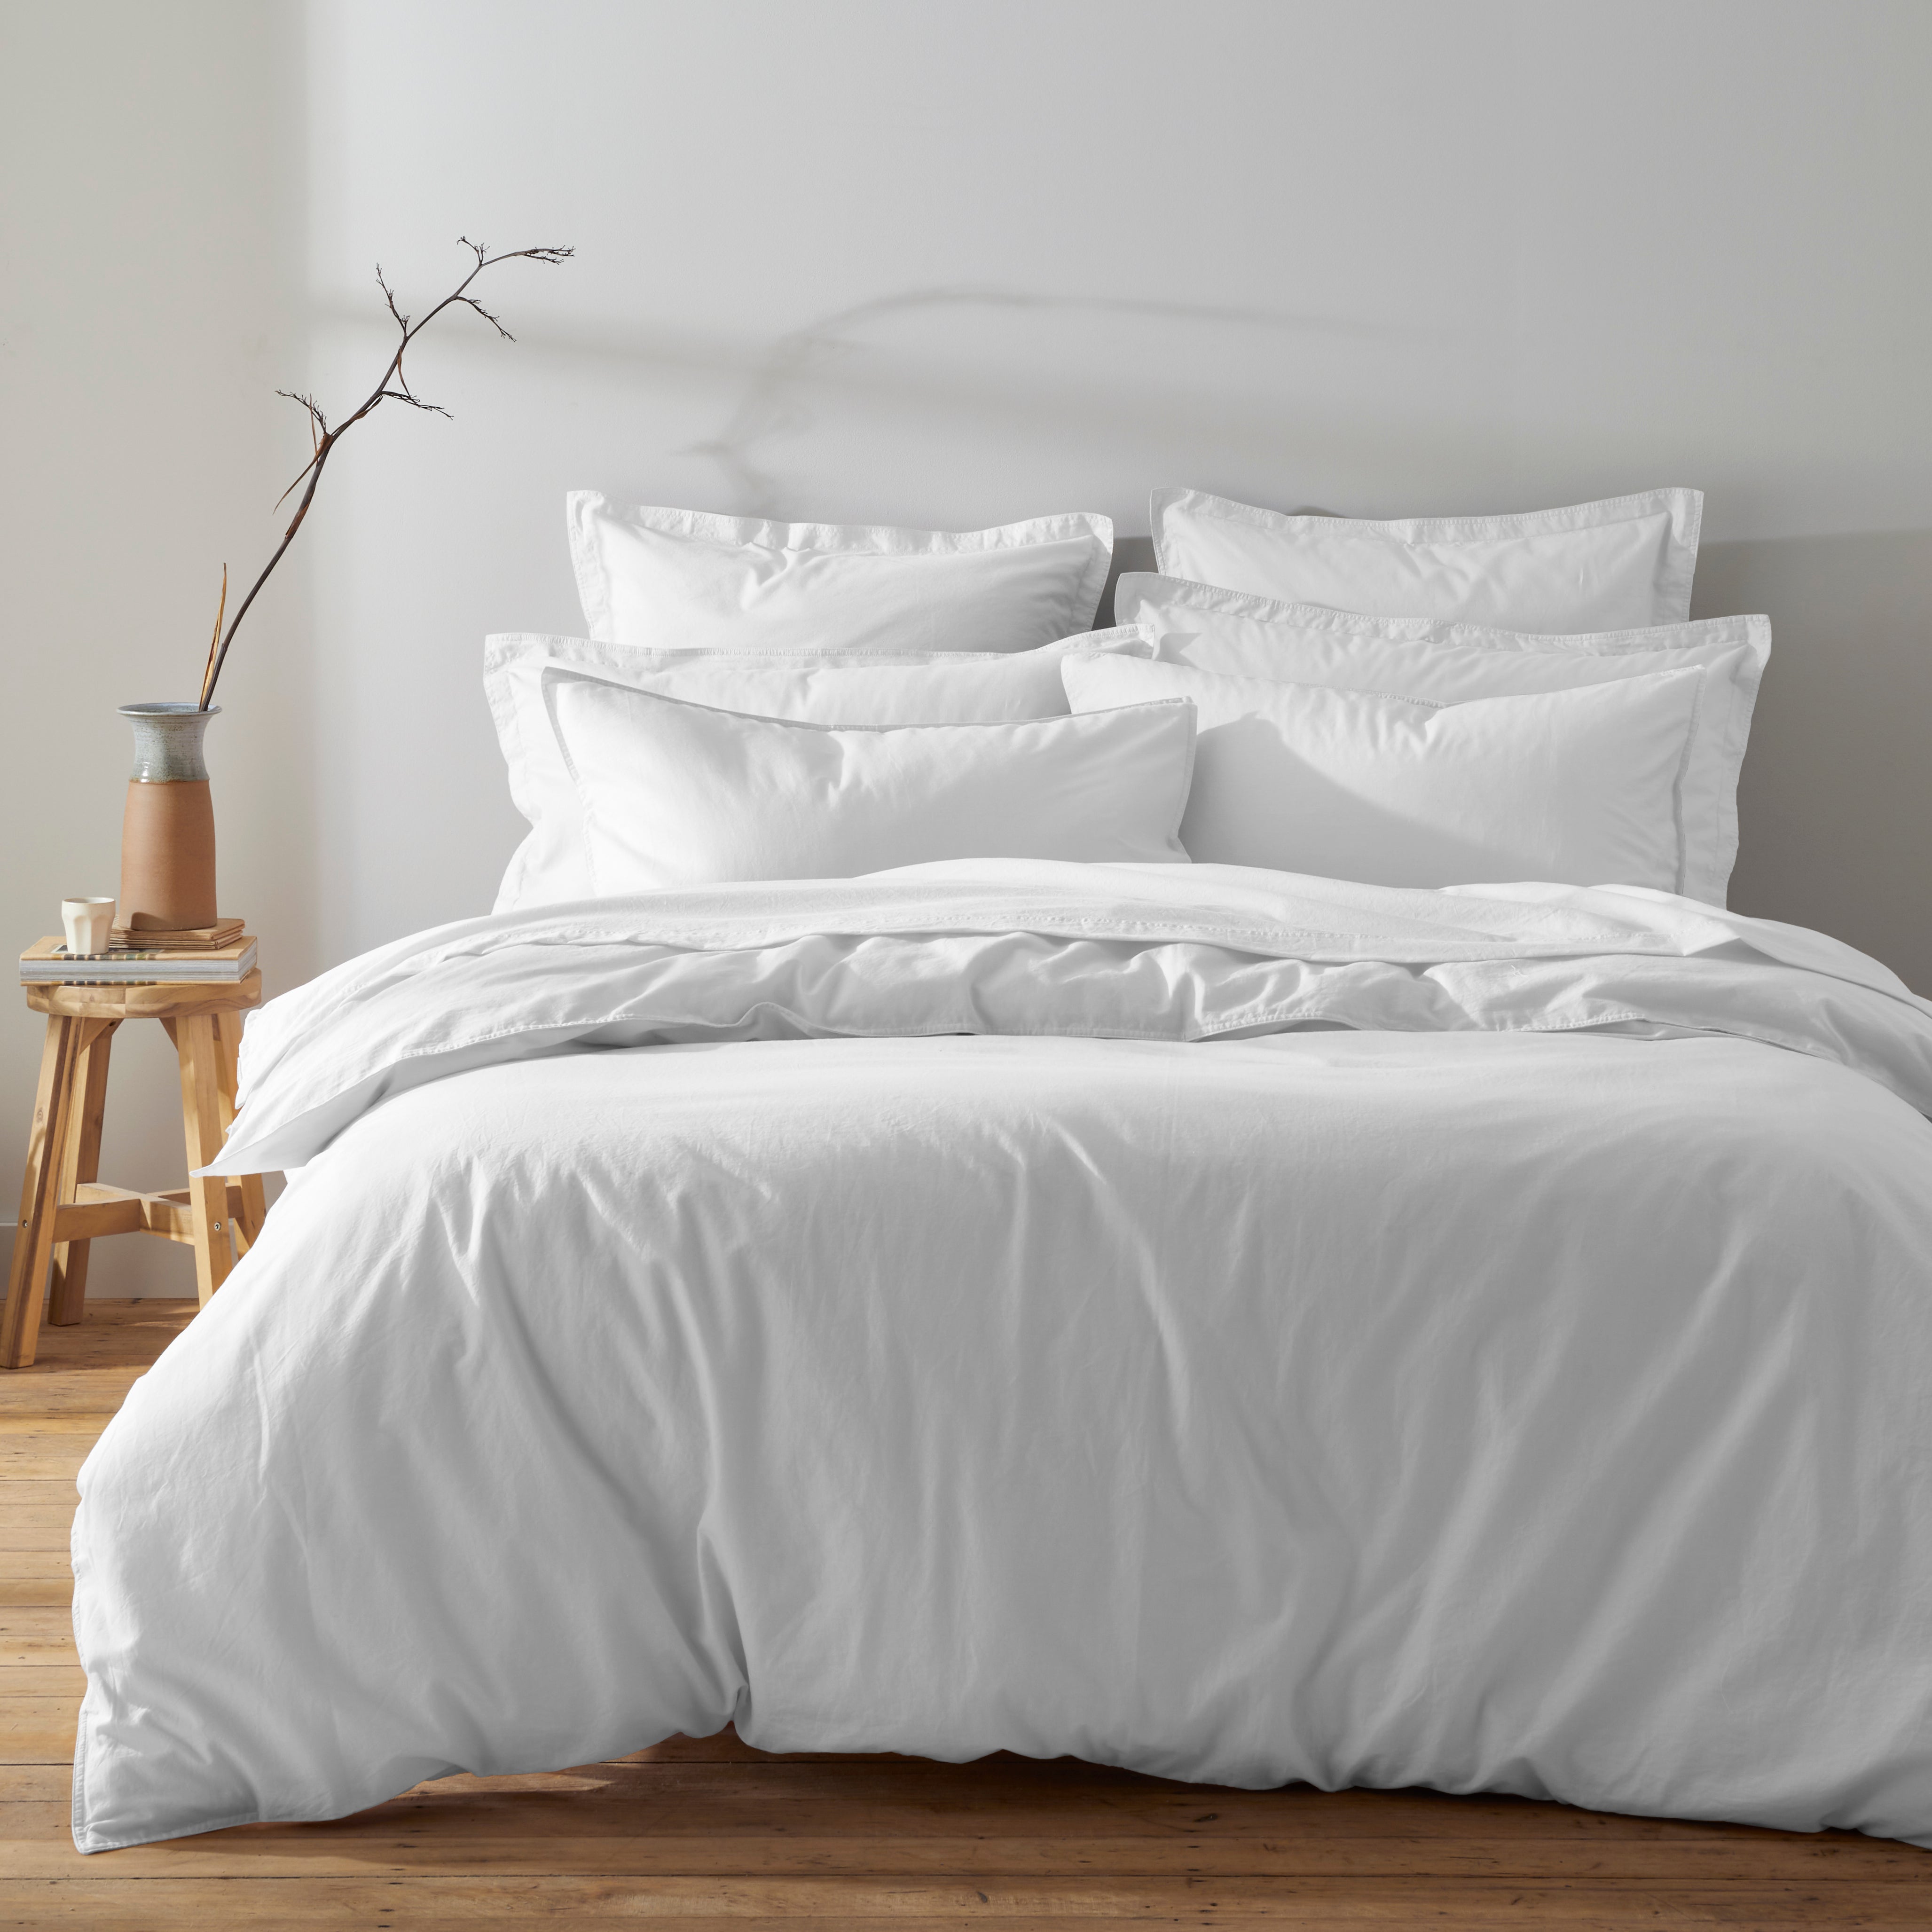 Soft Washed Recycled Cotton Duvet Cover And Pillowcase Set White